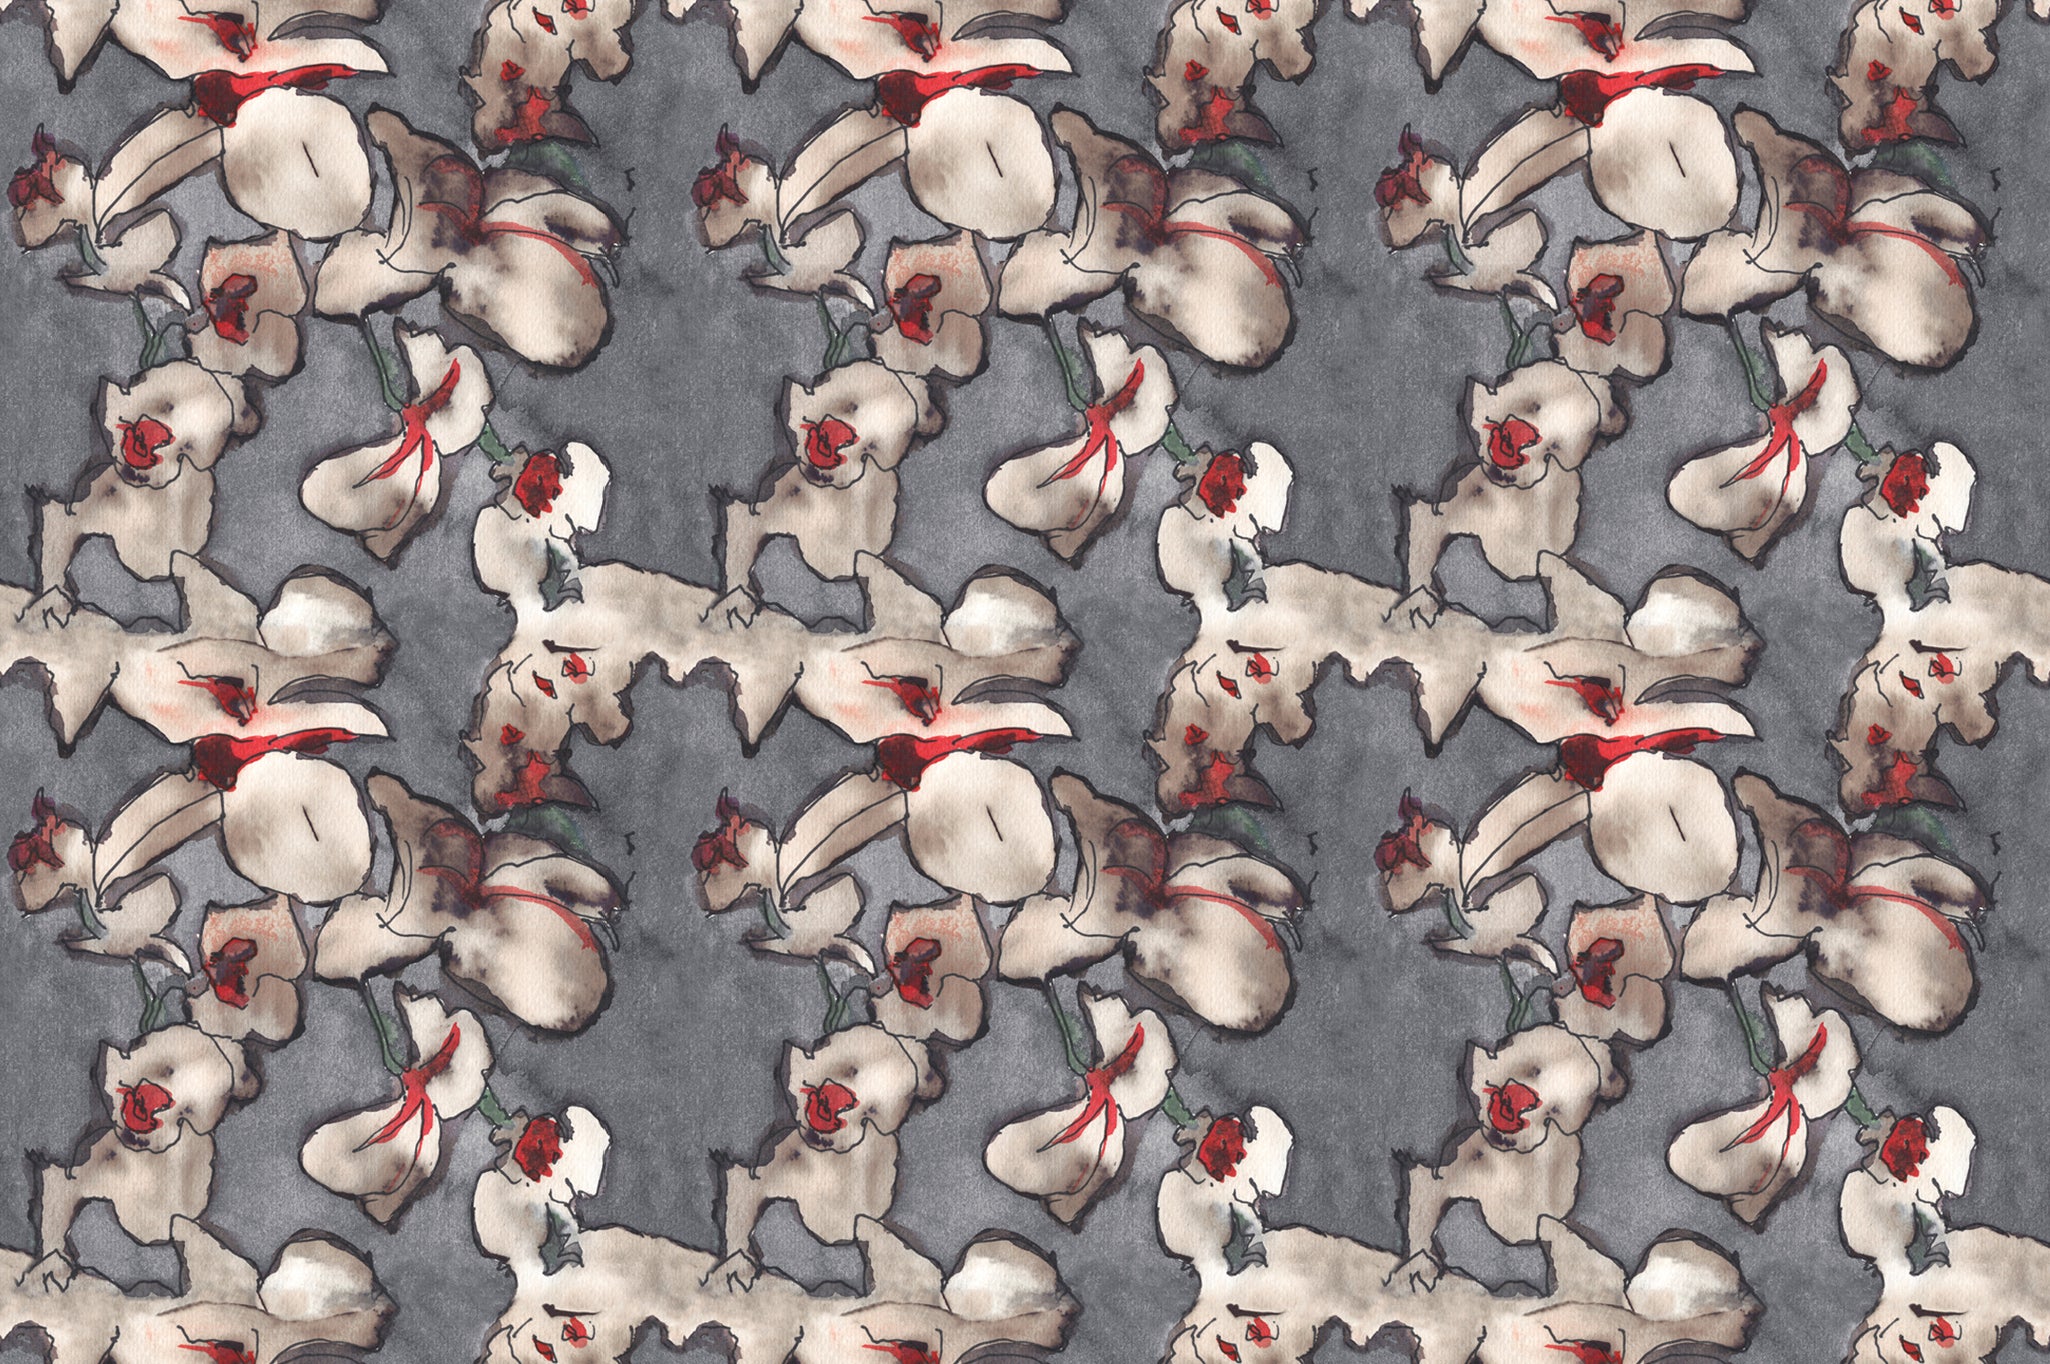 Detail of fabric in an abstract floral print in red, cream and gray on a dark gray field.